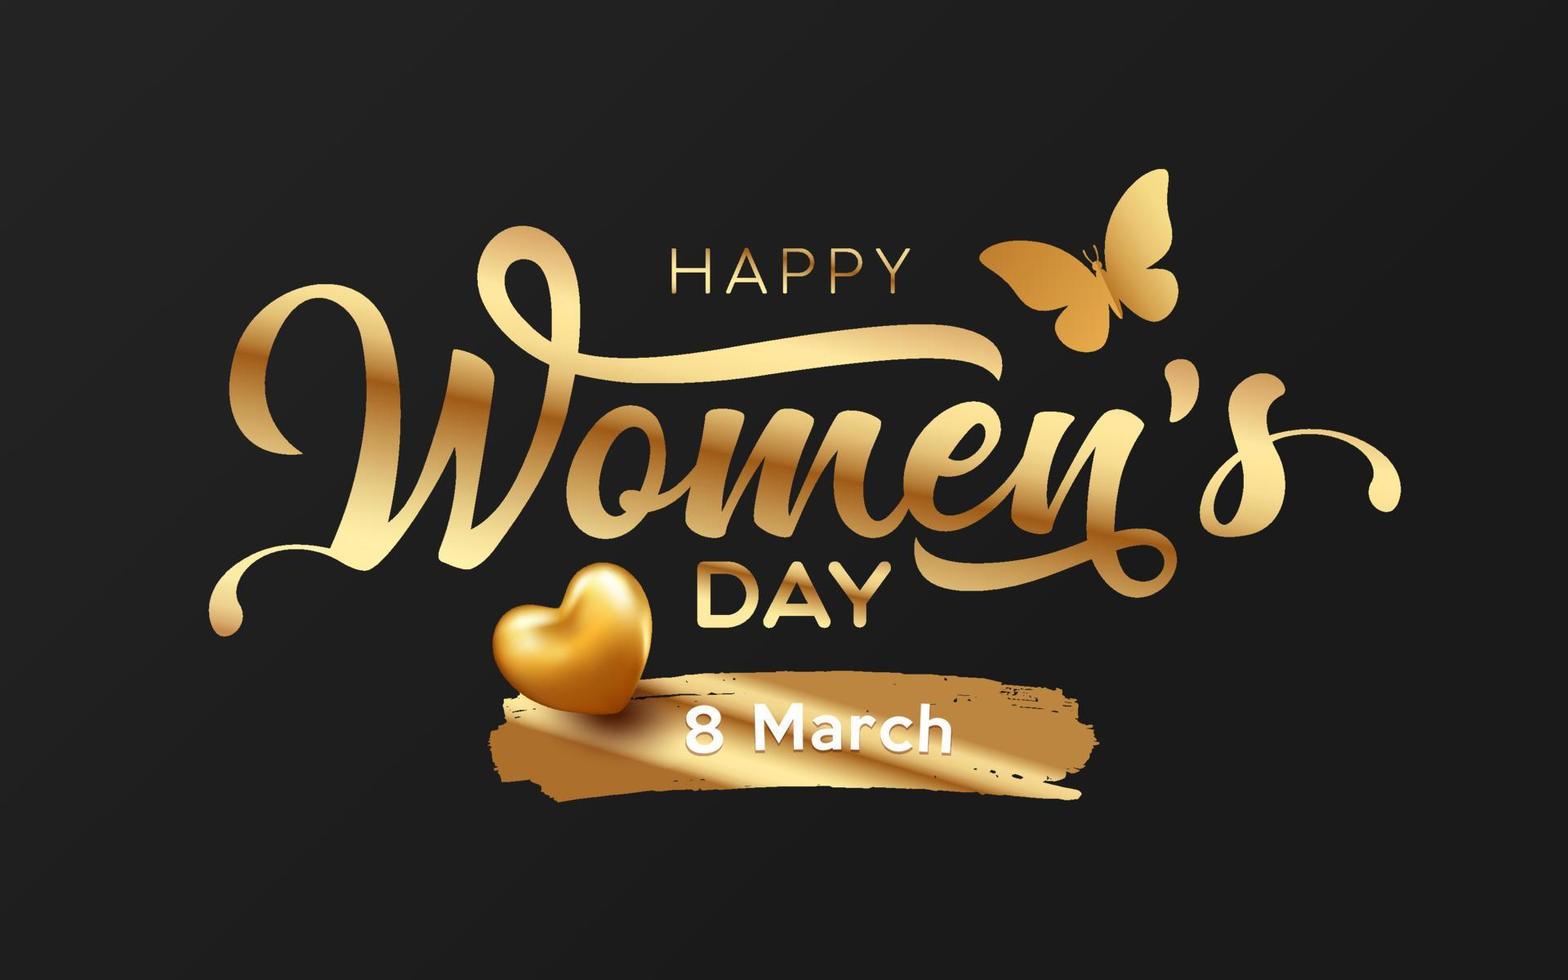 Happy Women's day message, butterfly and heart golden design on black background, EPS10 Vector illustration.